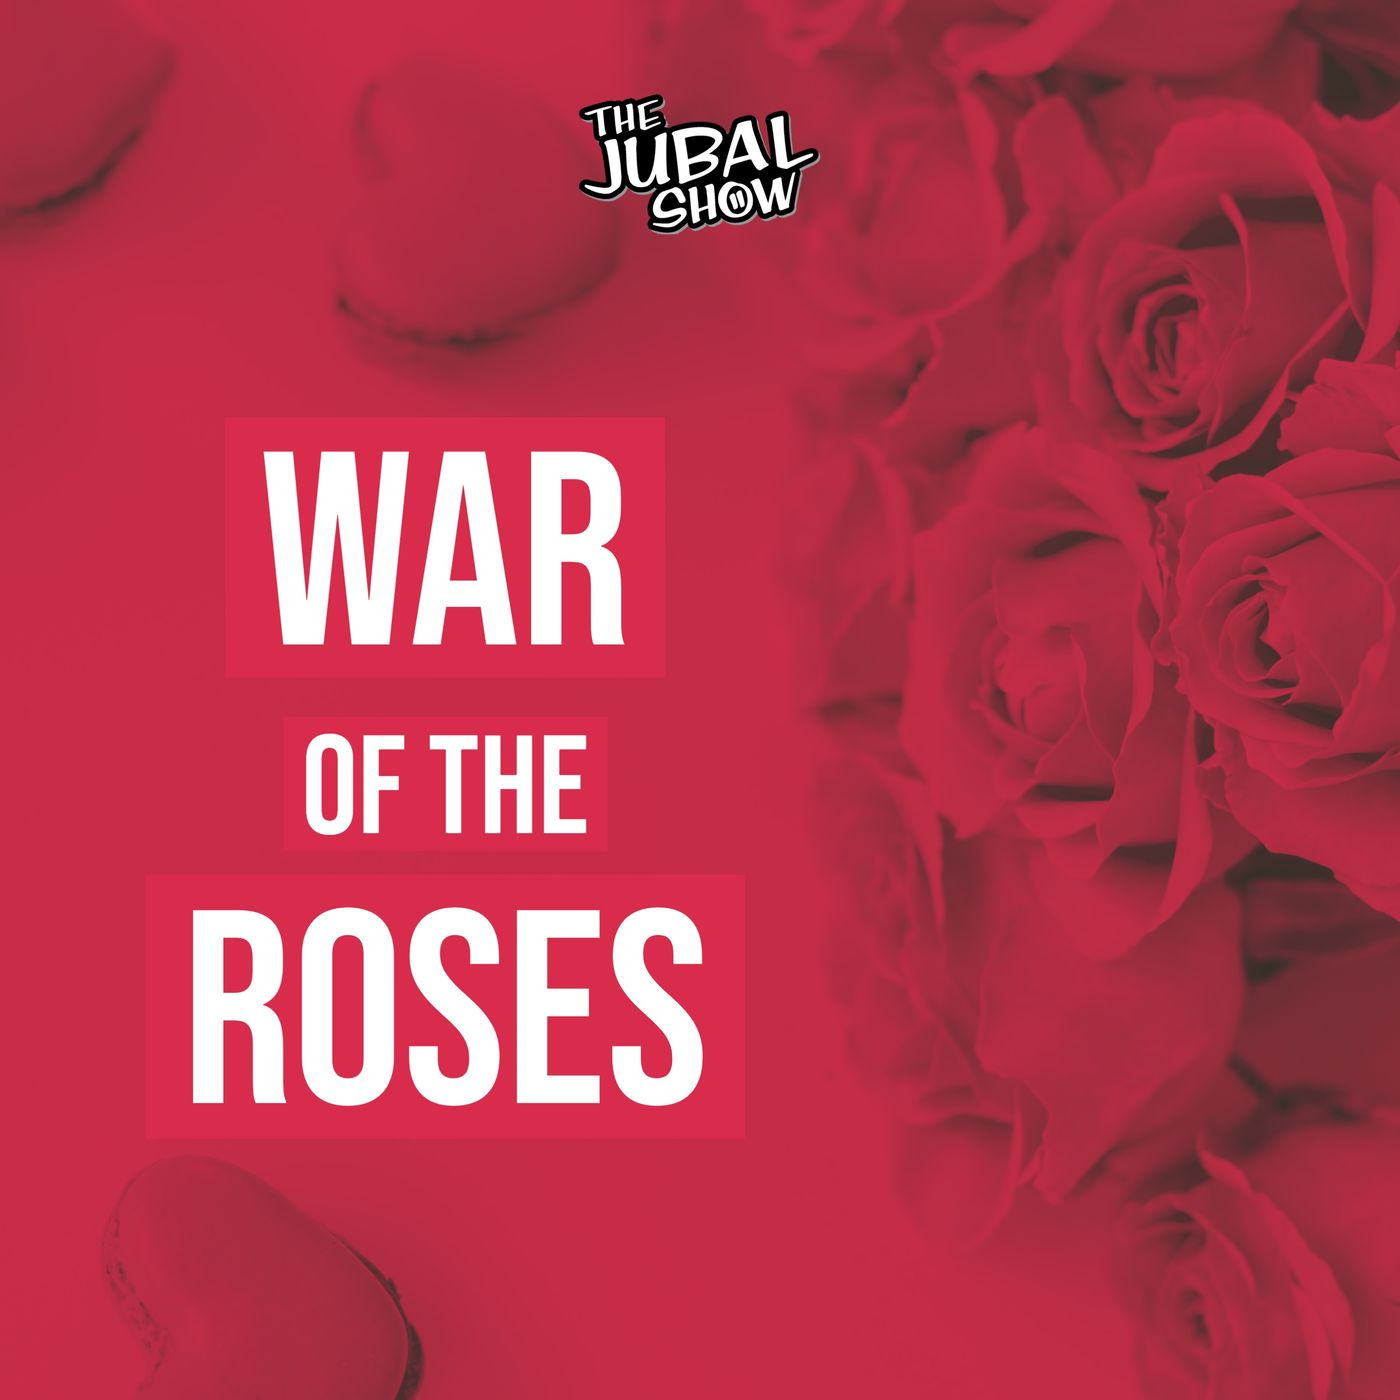 The Jubal Show wants to know 'Who's Beth?' in this War of the Roses!